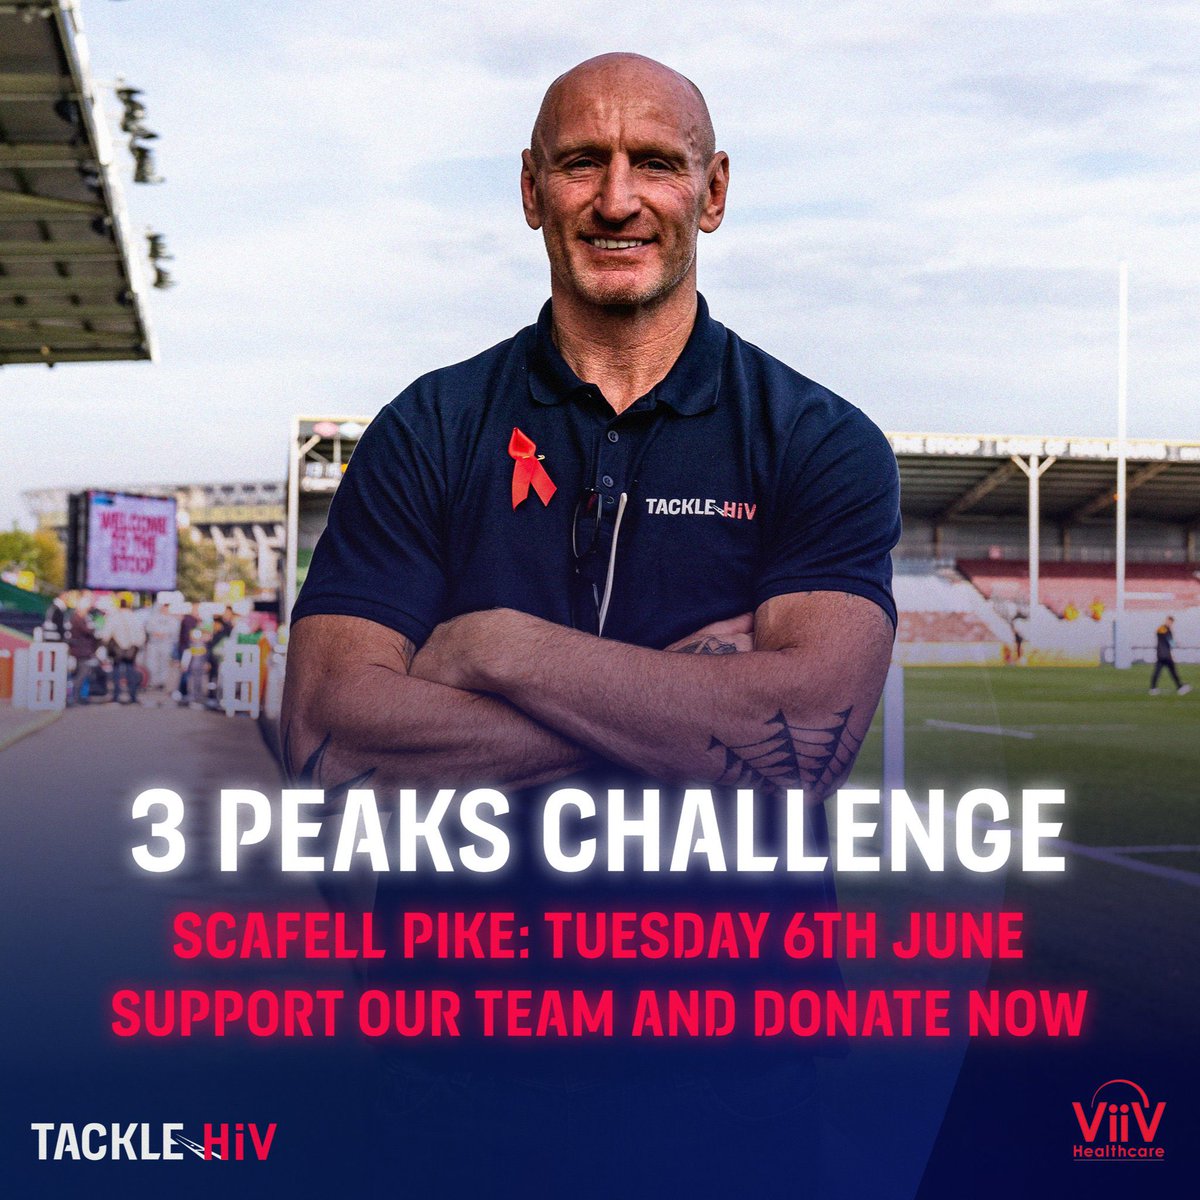 ⛰️Good luck to everyone climbing Scafell Pike today! 🥾 

You can support the team ⬇️
justgiving.com/page/tackle-hi…

Thank you! 
@NathanielJHall @gareththomas14 @TackleHIV @THTorguk